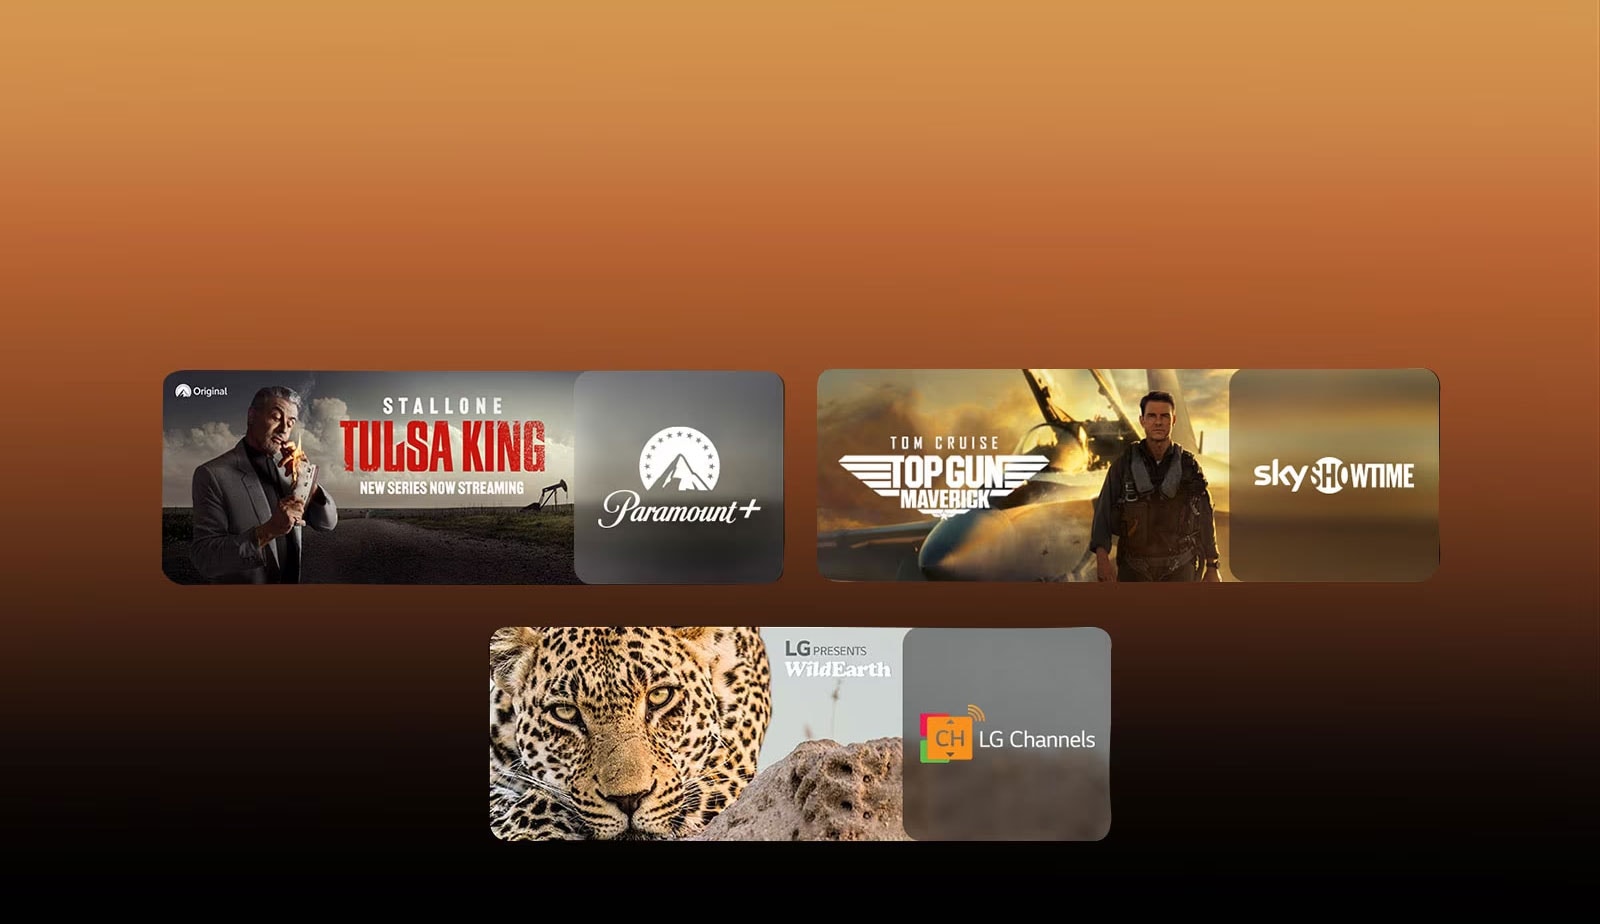 There are logos of streaming service platforms and matching footages right next to each logo. There are images of Paramount+'s Tulsa King, sky showtime's TOP GUN, and LG CHANNELS' leopard.